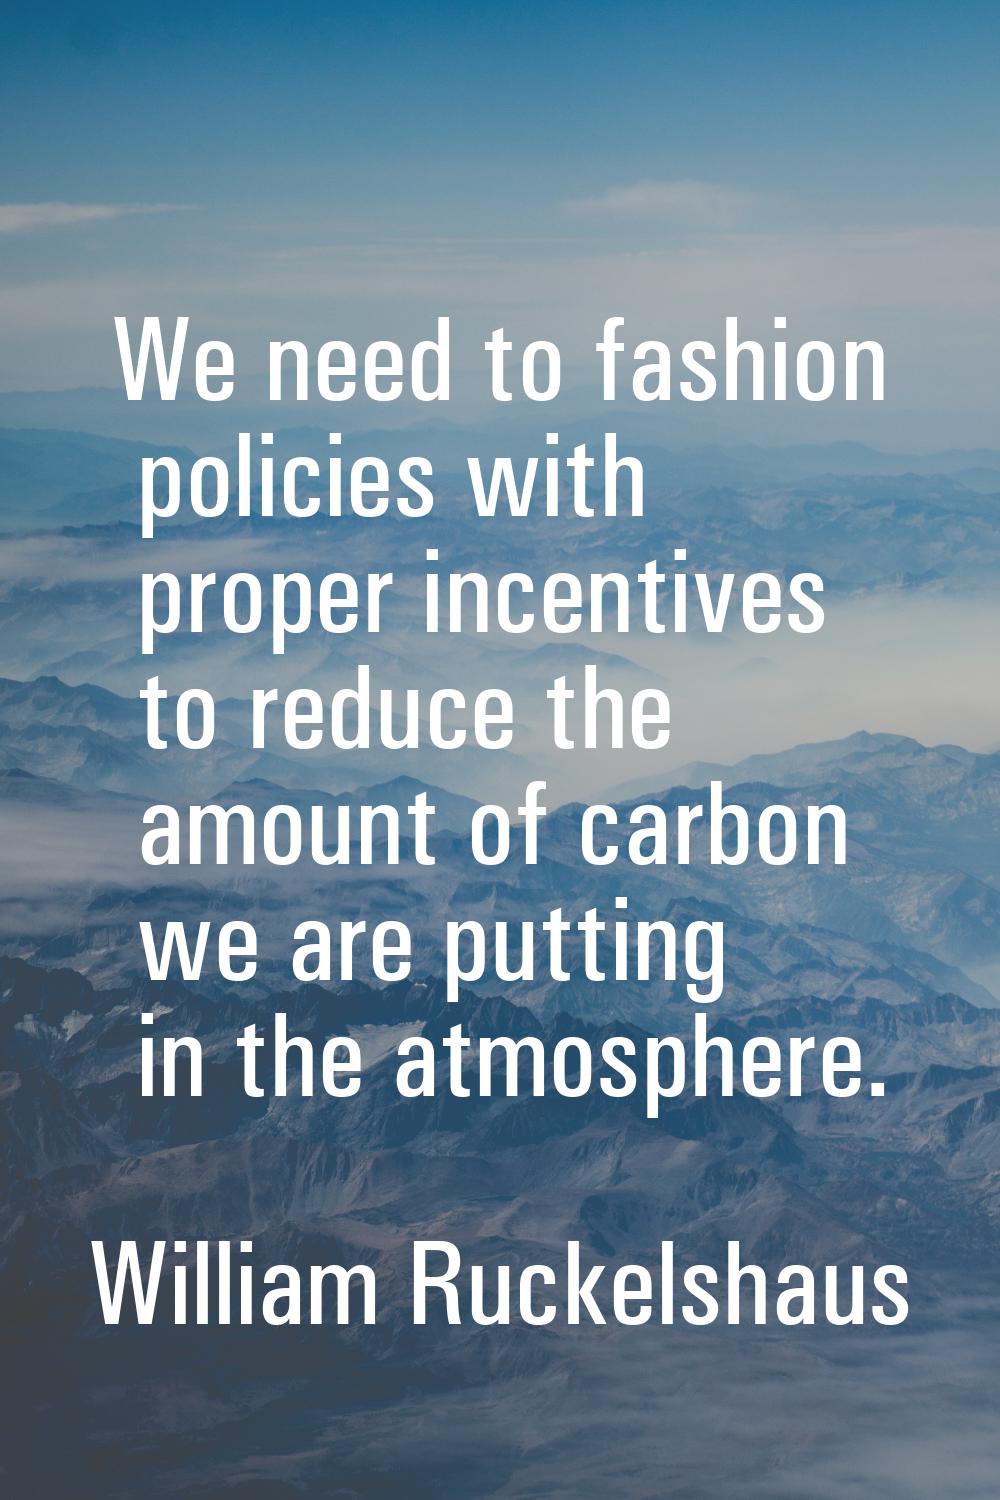 We need to fashion policies with proper incentives to reduce the amount of carbon we are putting in